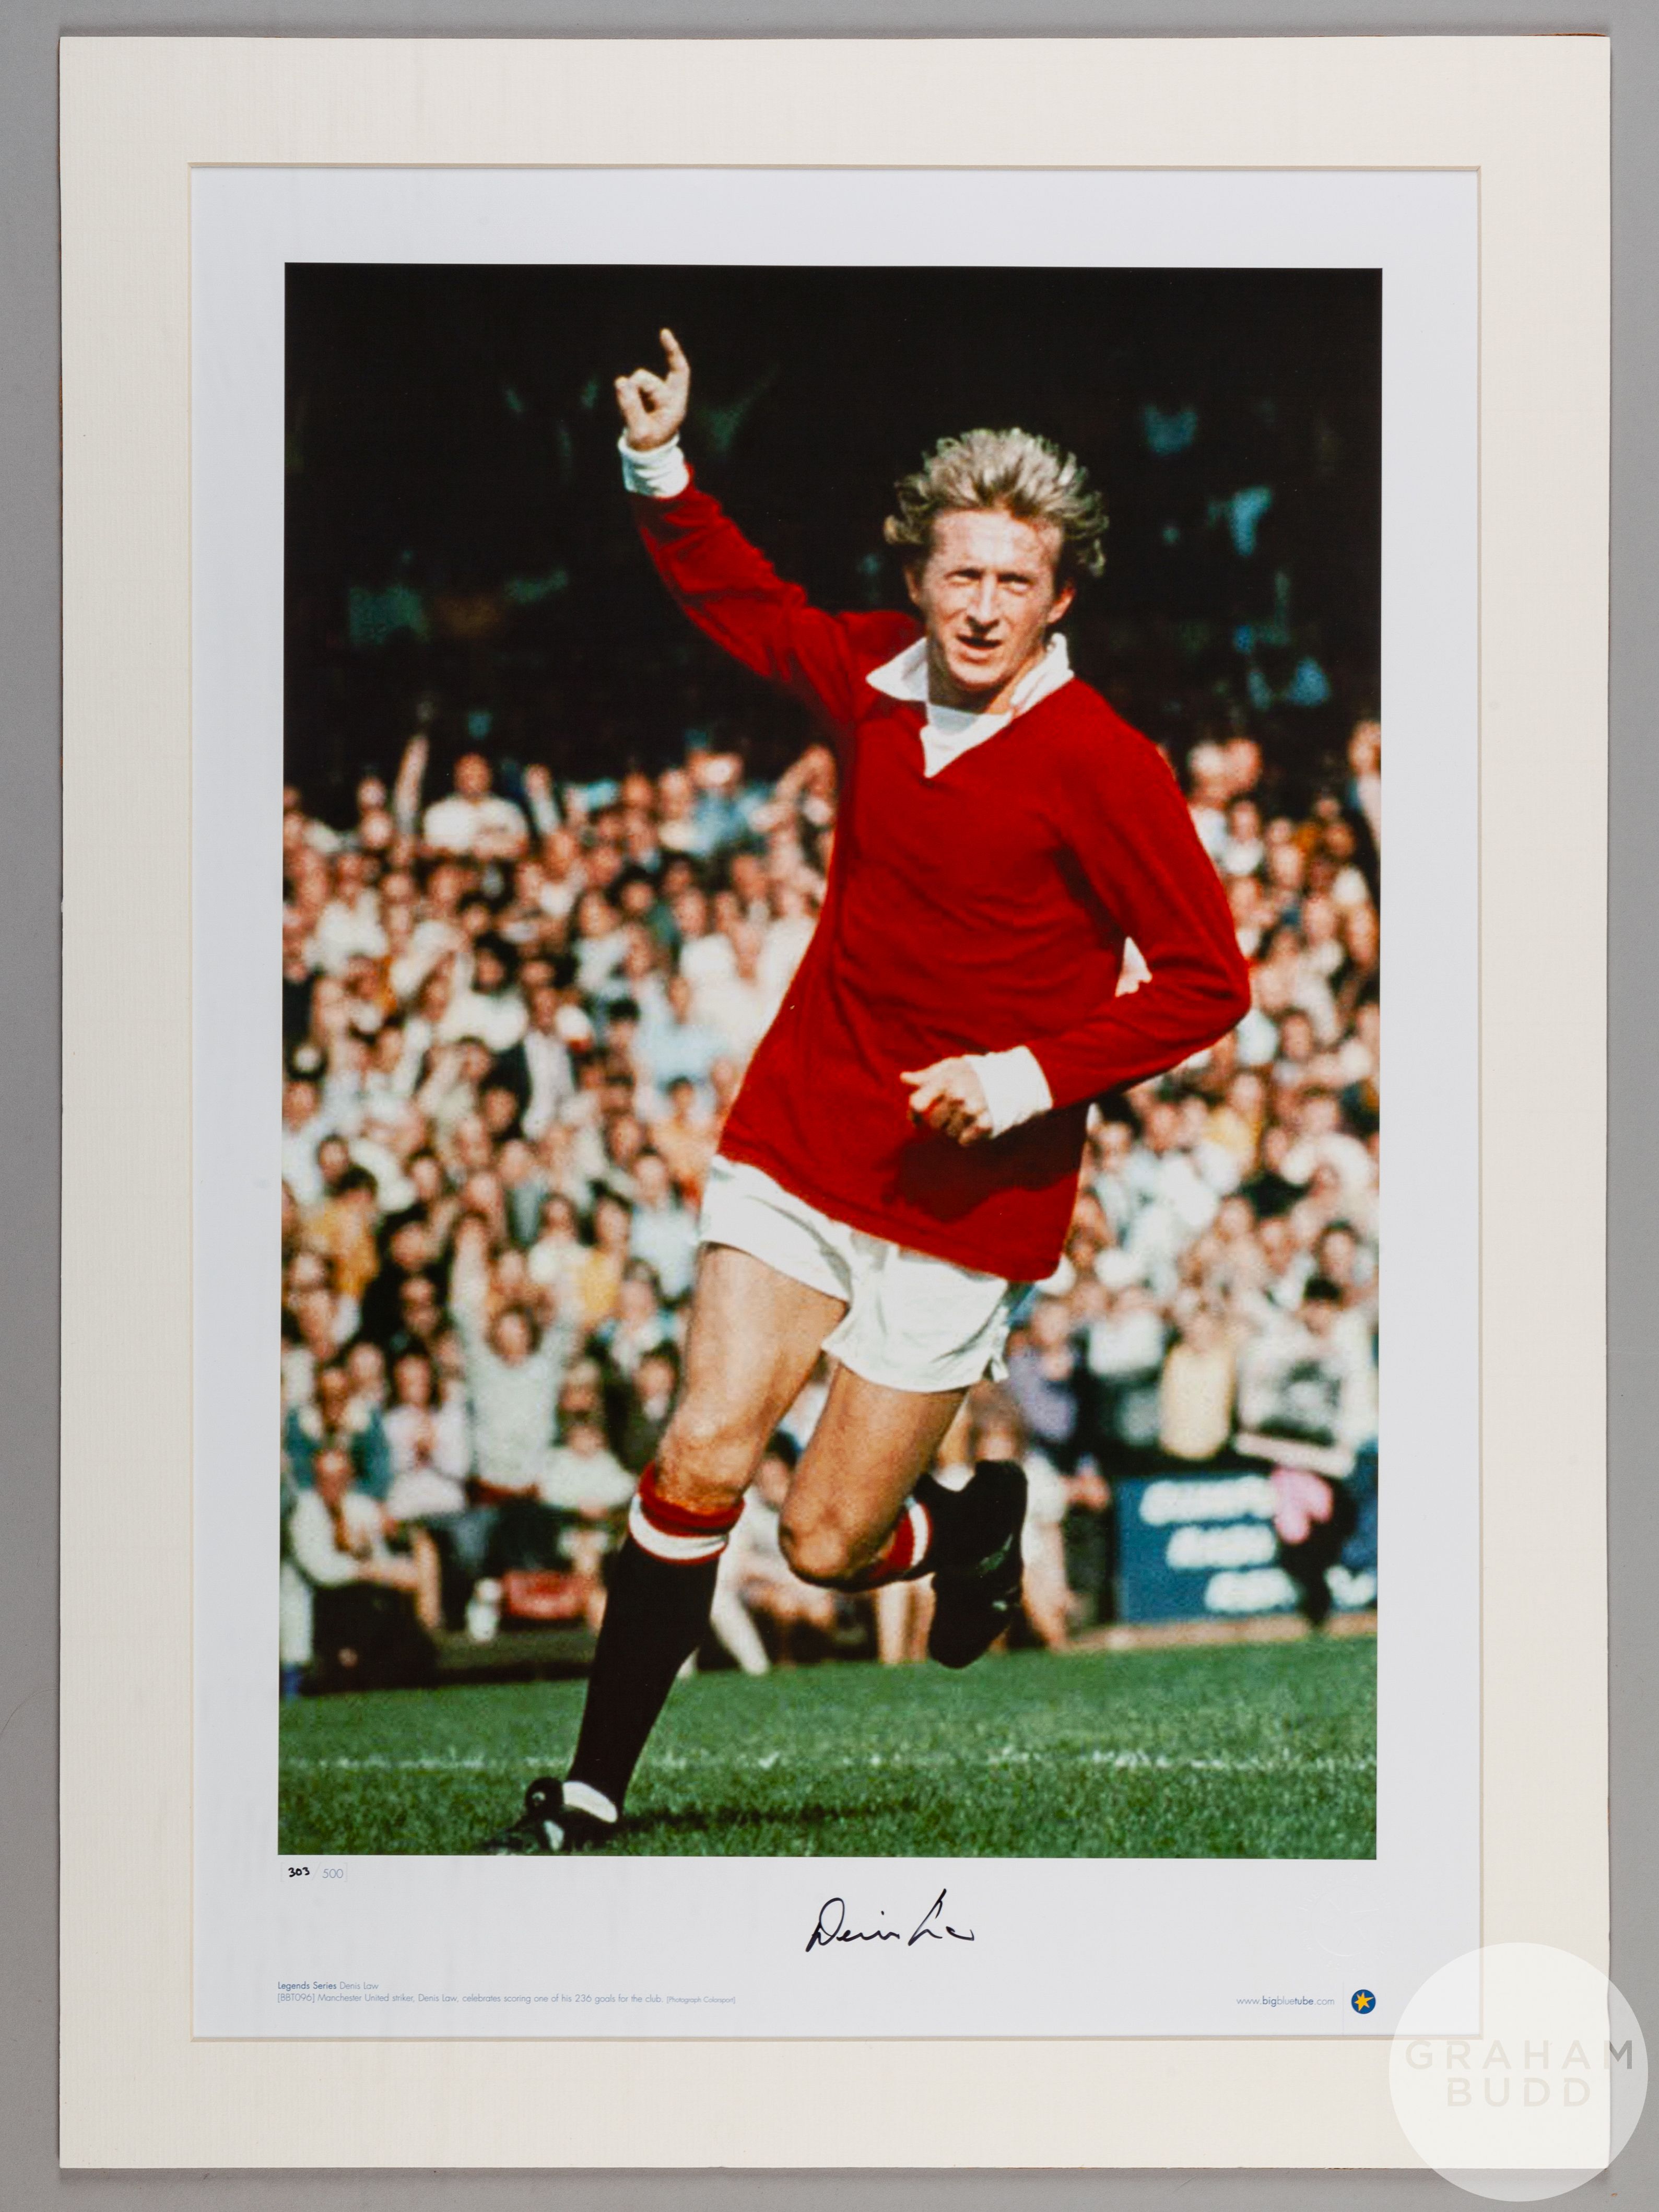 A large colour photographic print of Denis Law playing for Manchester United.